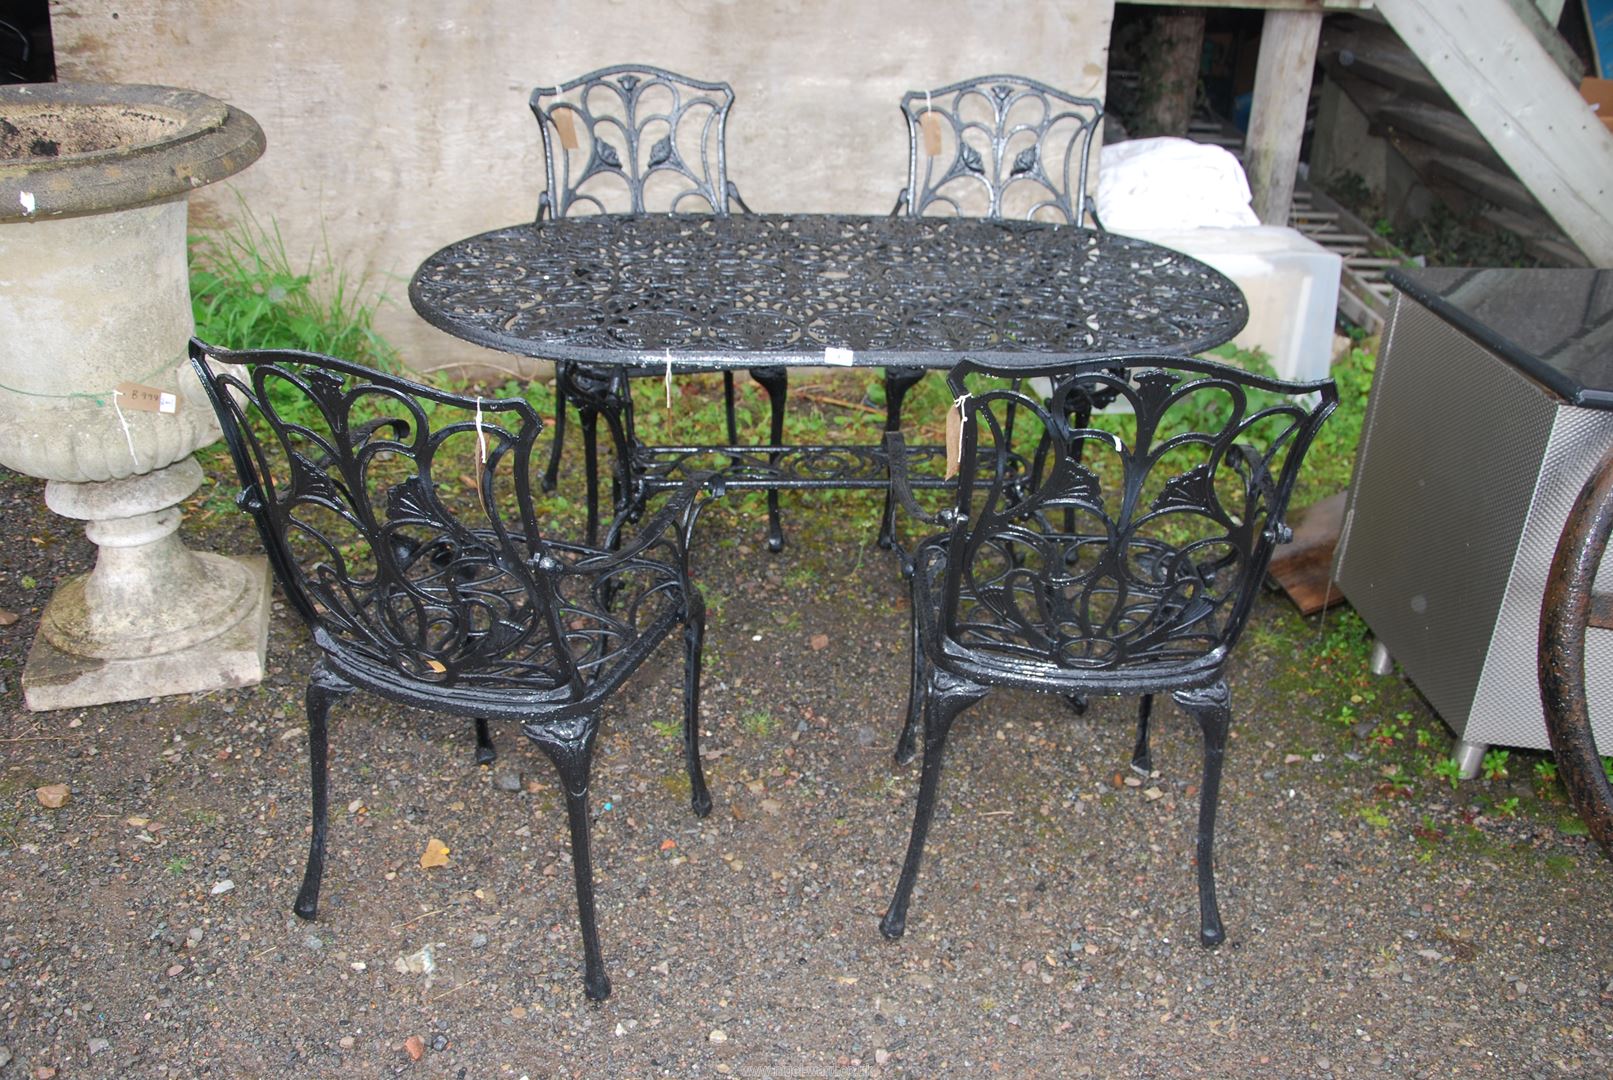 A black painted Aluminium decorative patio Table, 55" wide x 28" high and four chairs. - Bild 2 aus 2